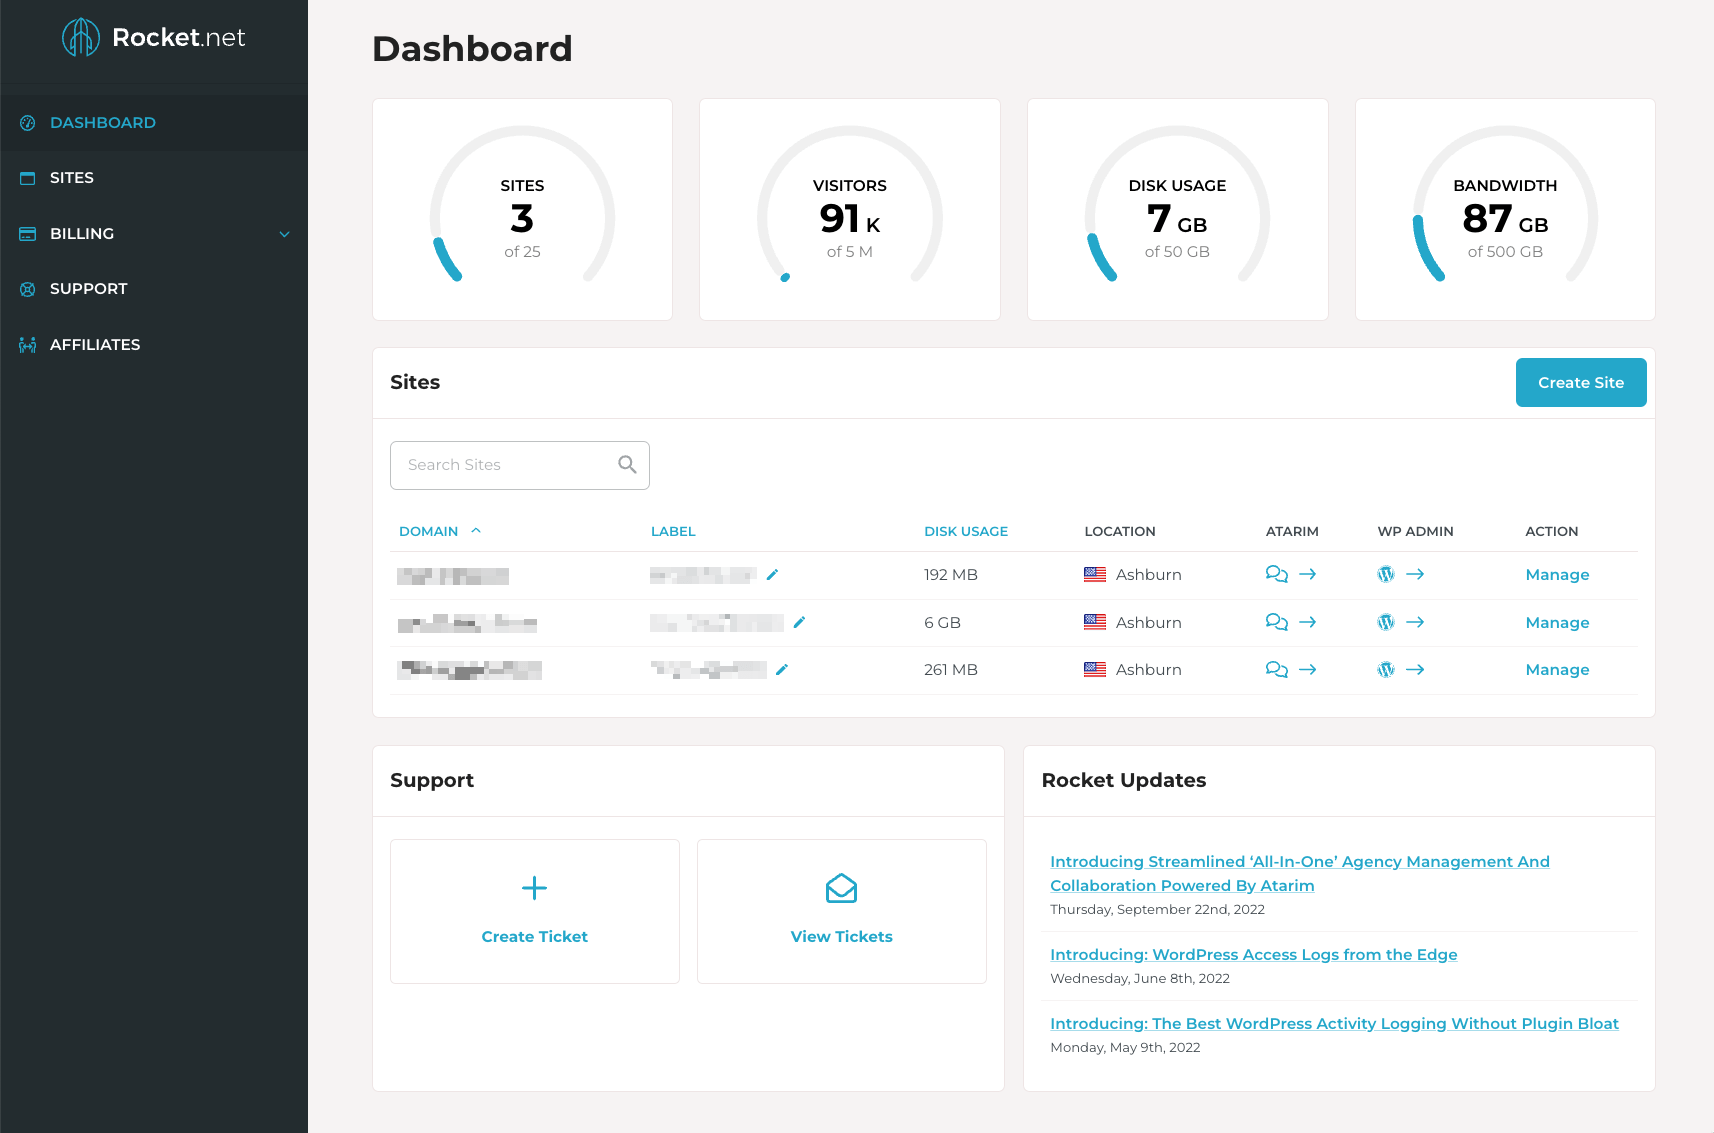 Rocket.net review: the dashboard